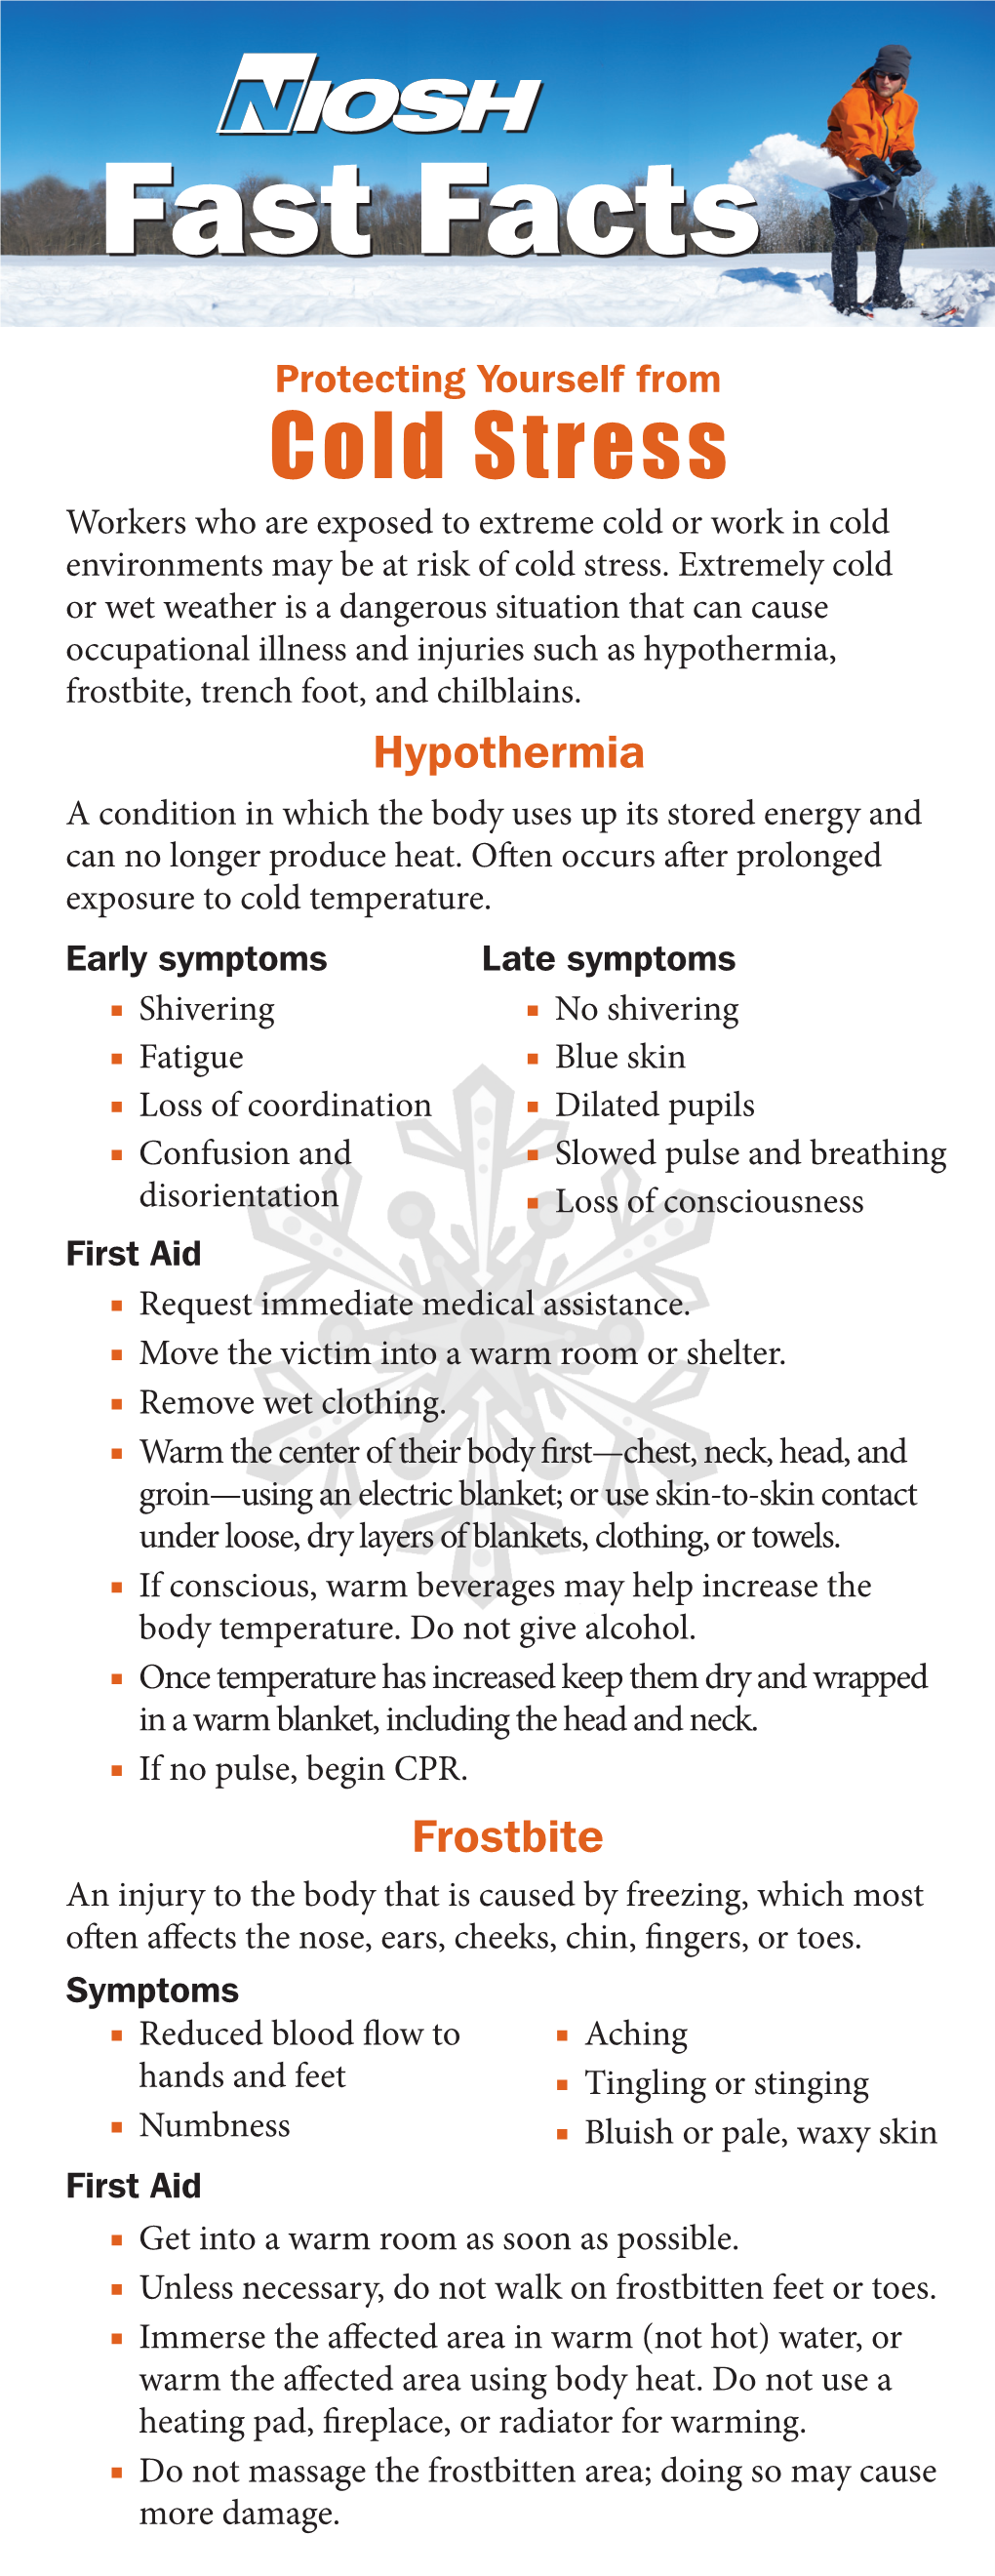 NIOSH Fast Facts: Protecting Yourself from Cold Stress